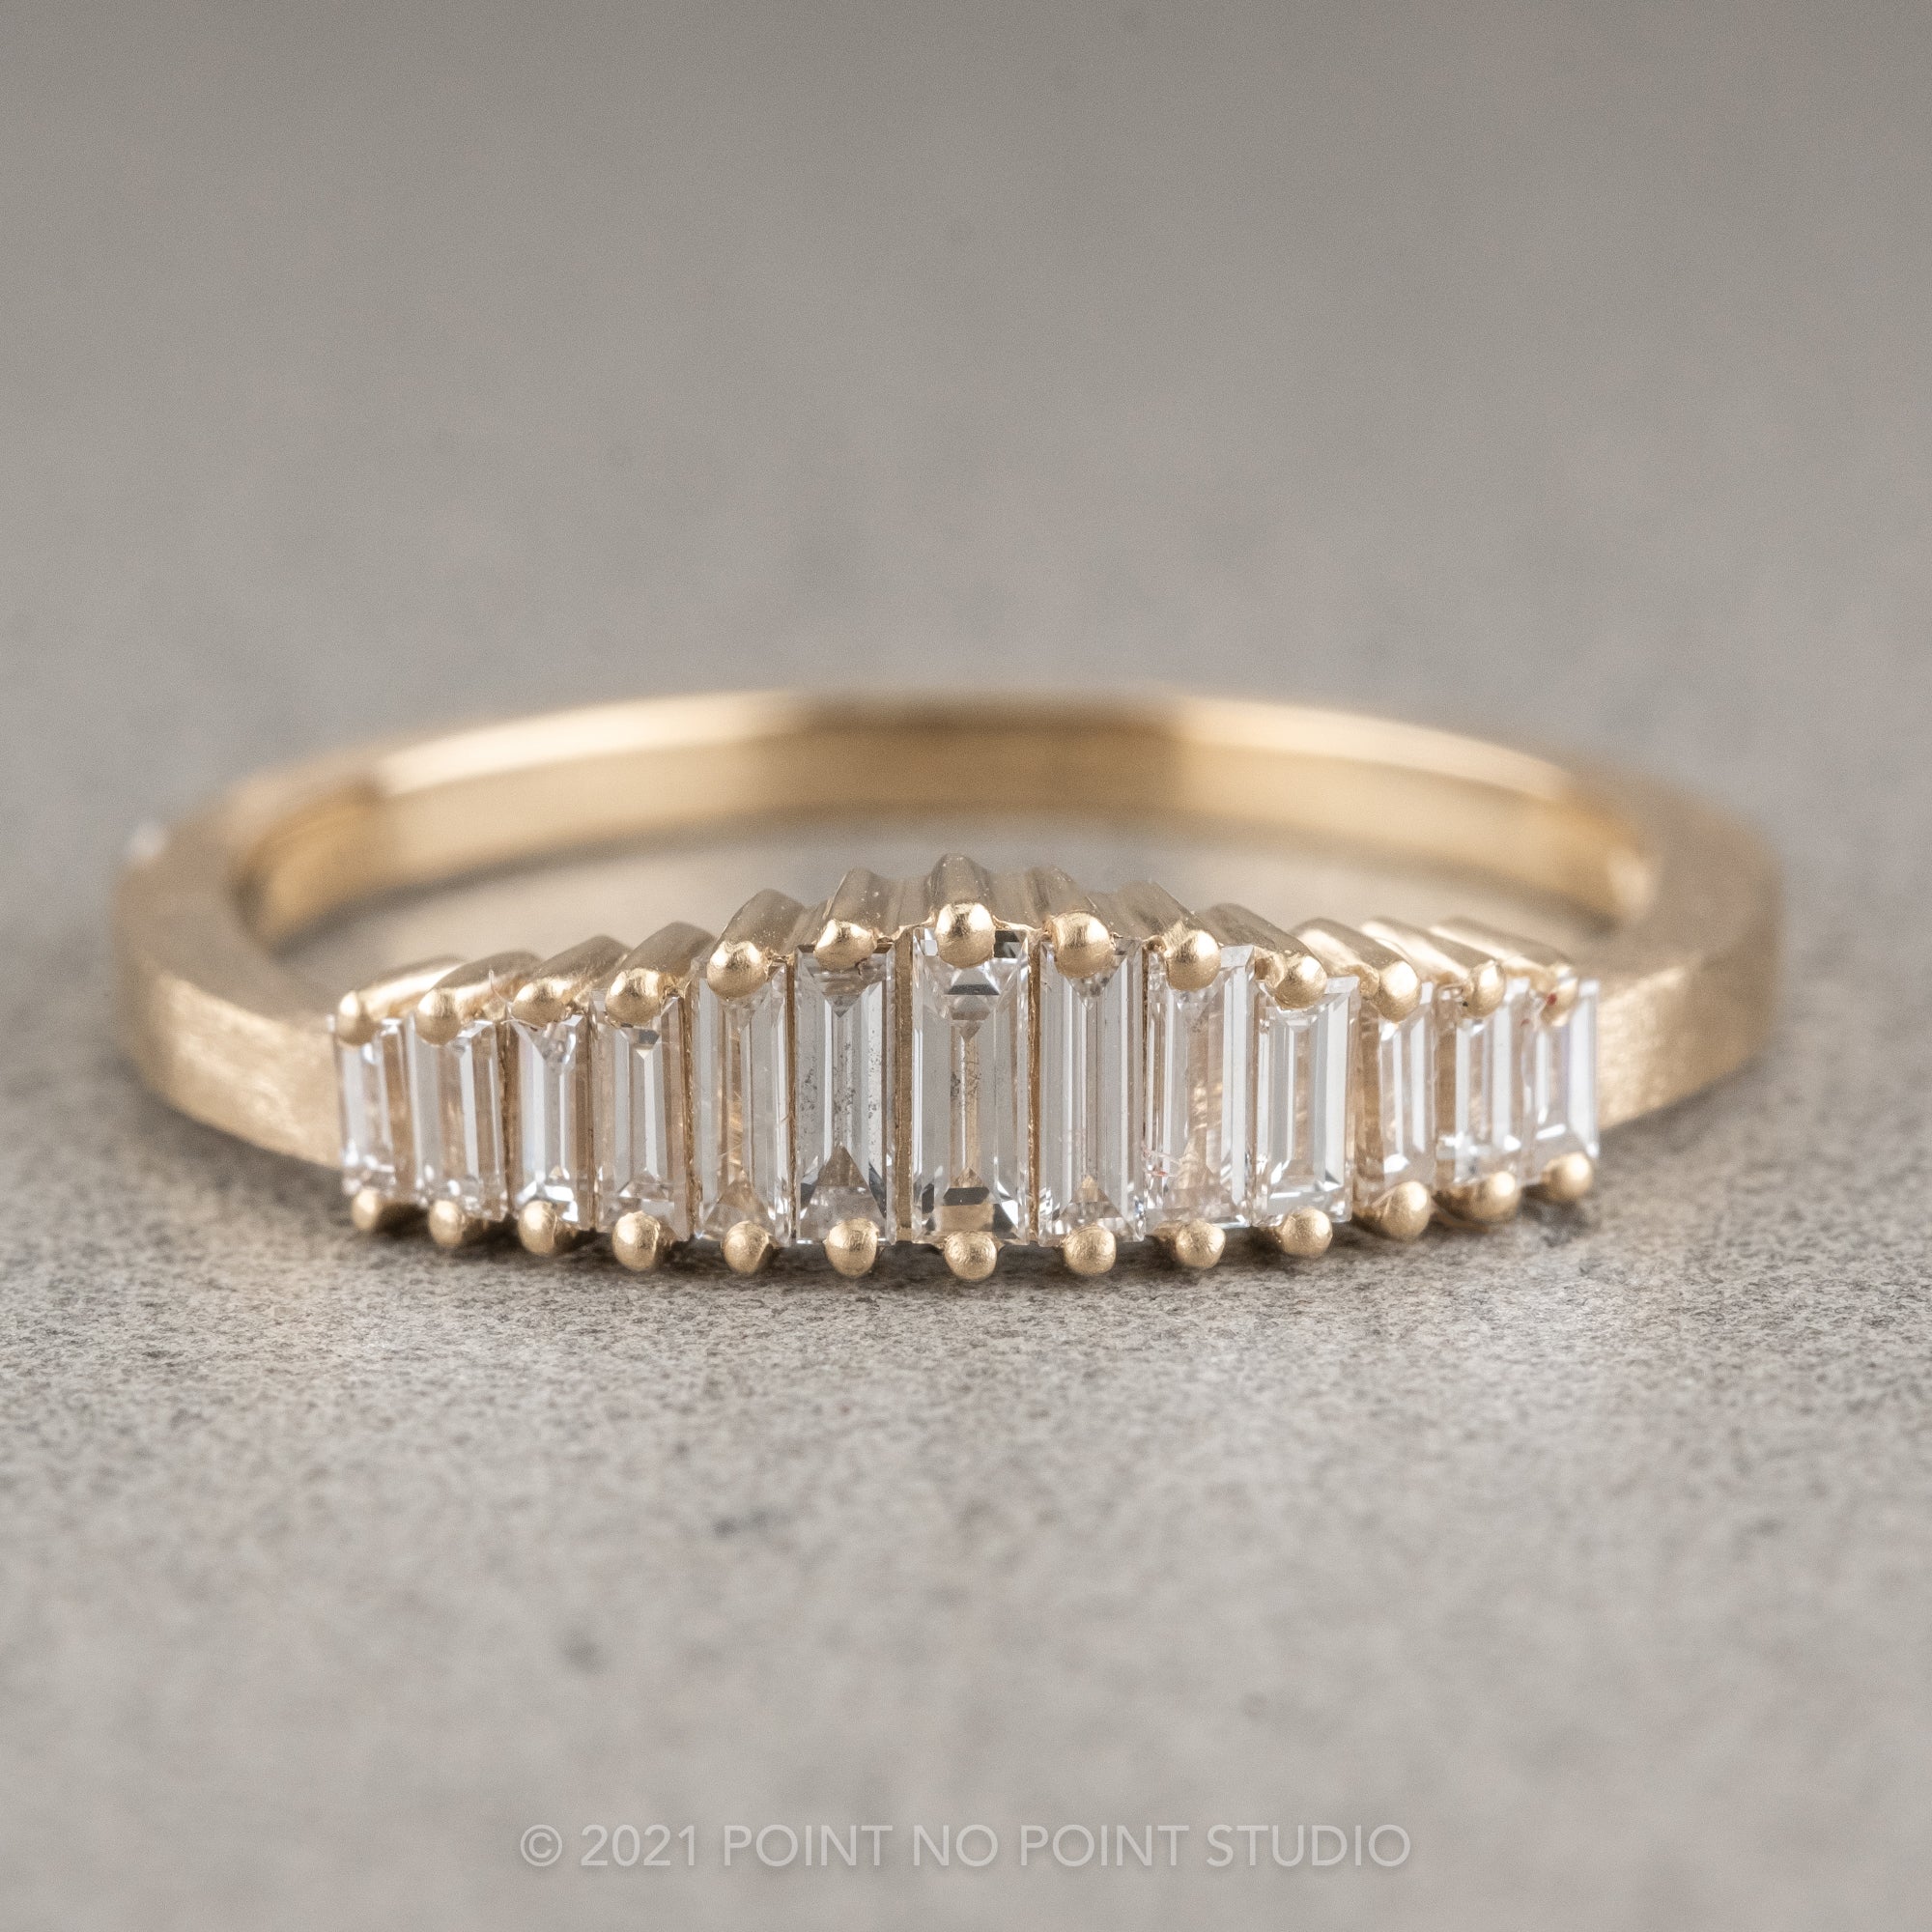 10k Yellow Gold Baguette Diamond Cocktail Ring - A&V Pawn